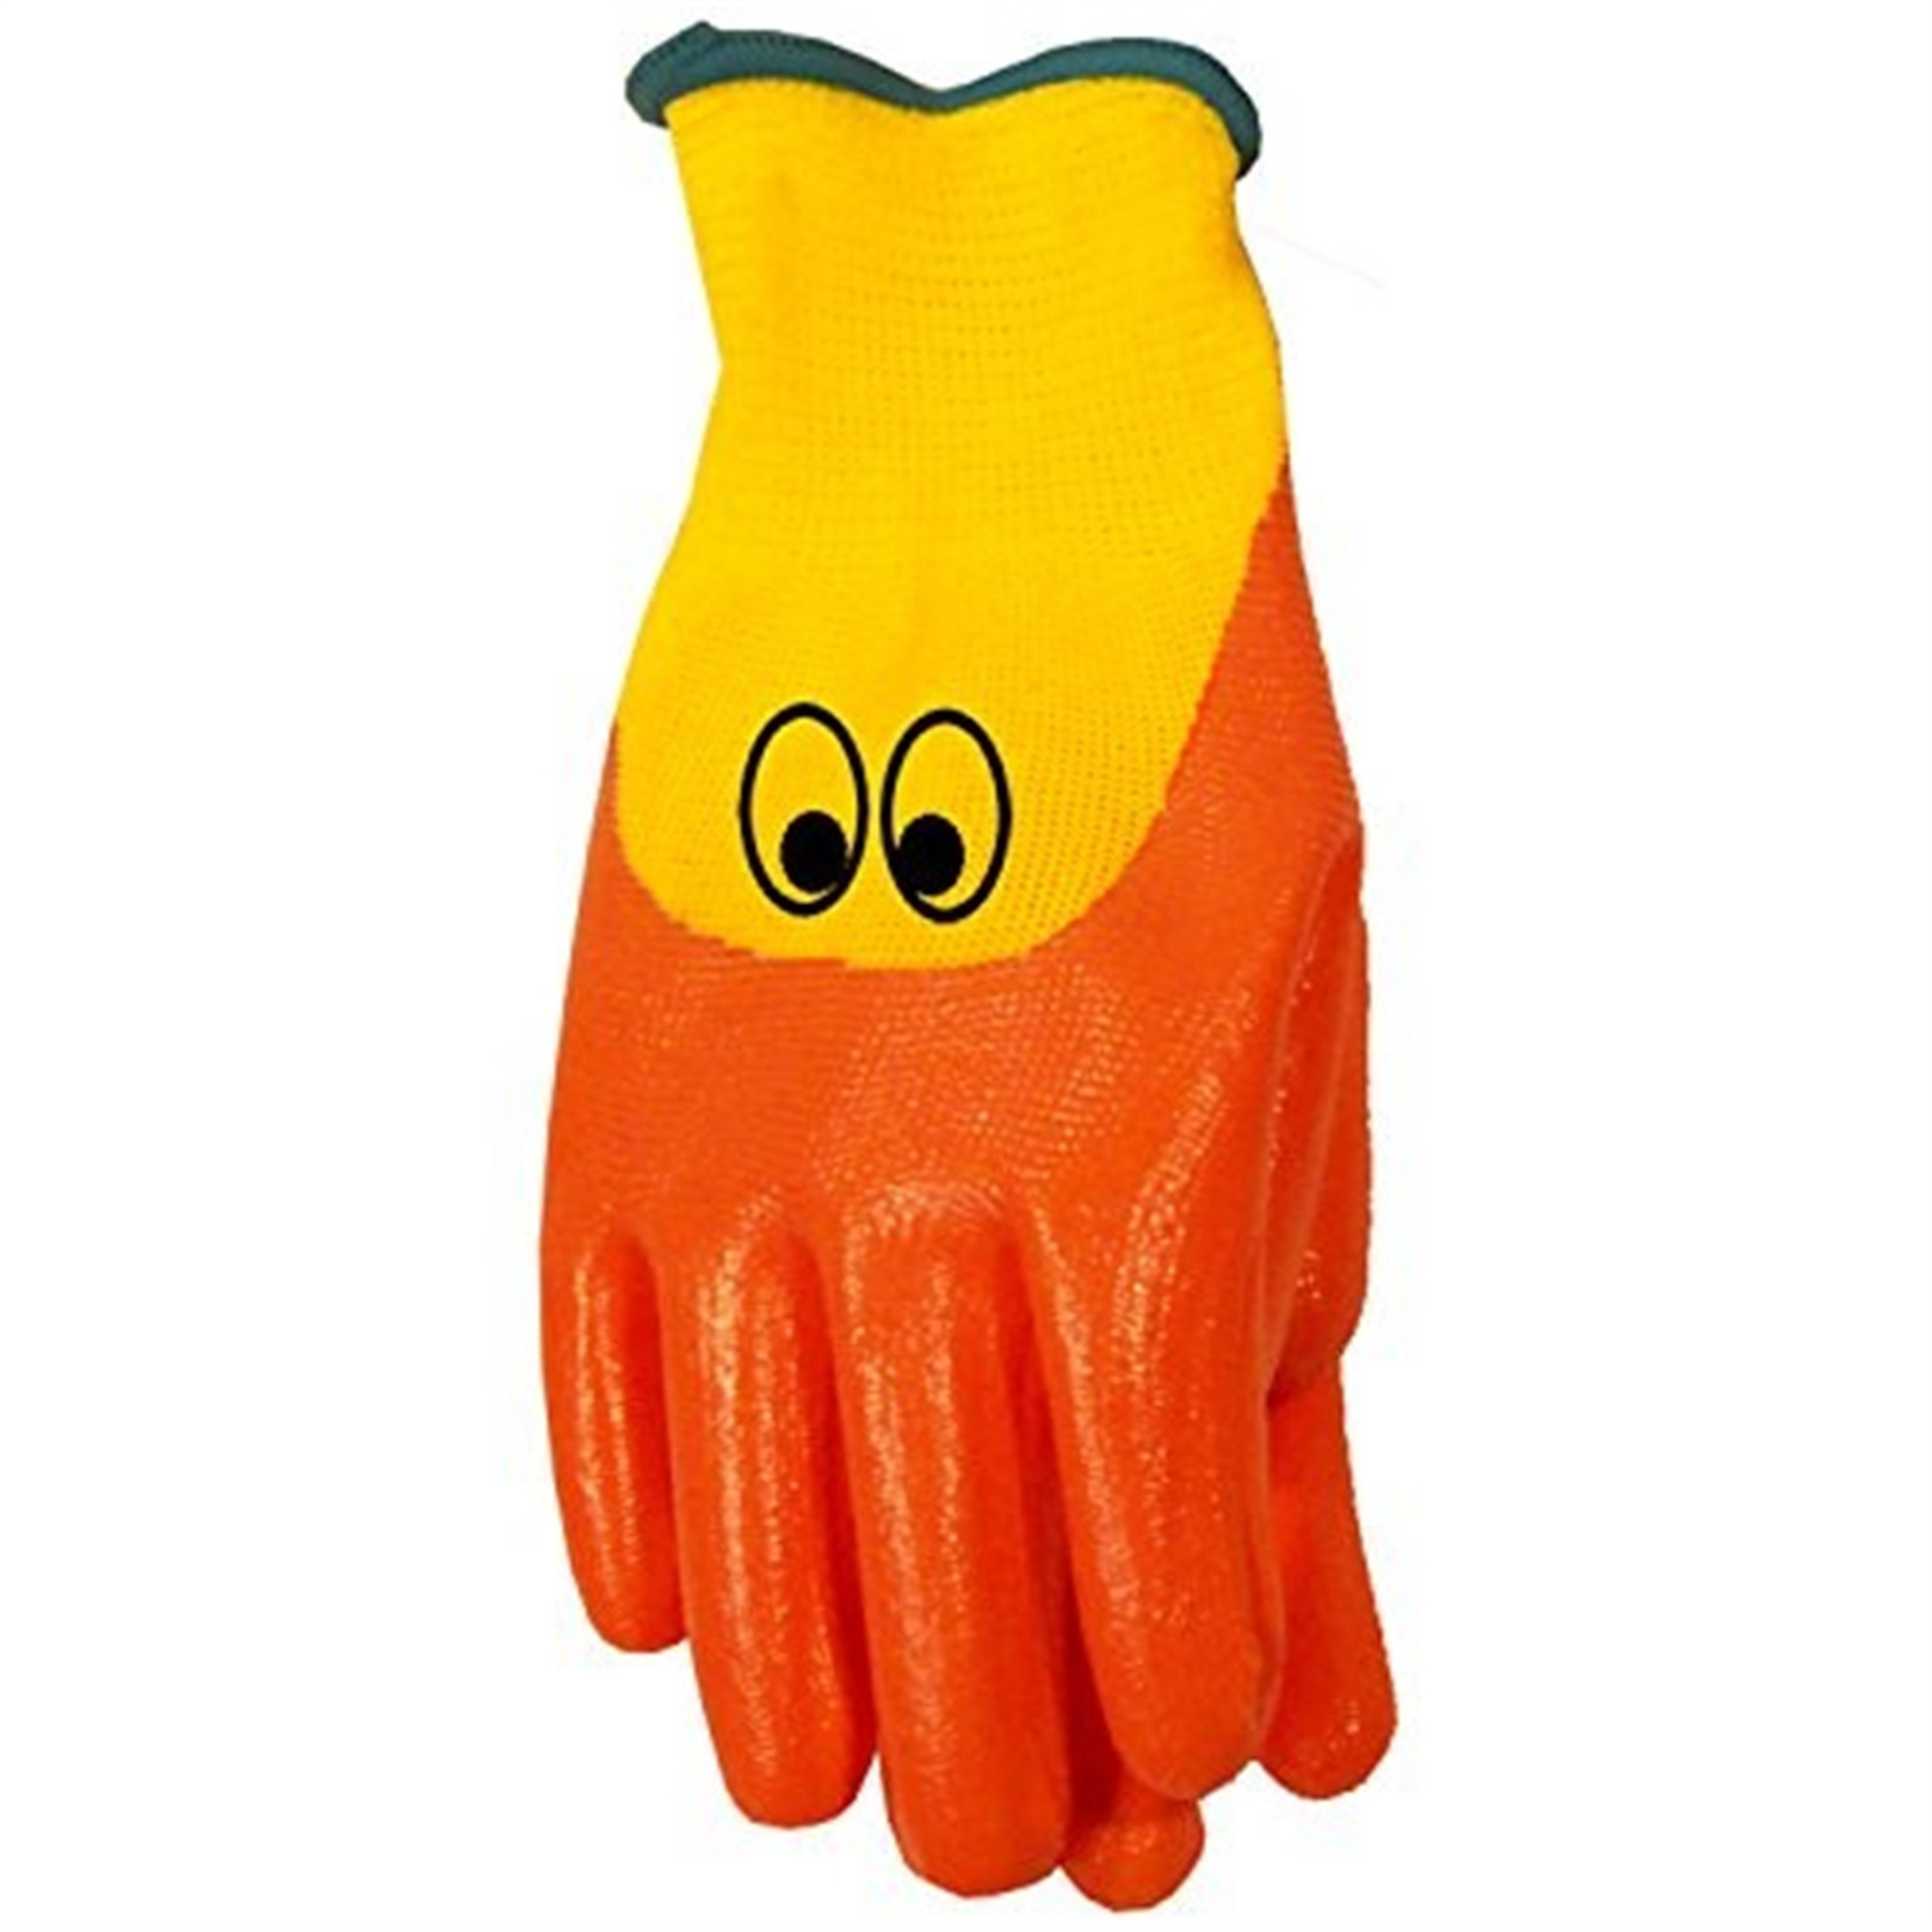 Atlas Glove Ducky Gloves for Kids, One Size Fits Ages 3 to 8 - Yellow/Orange